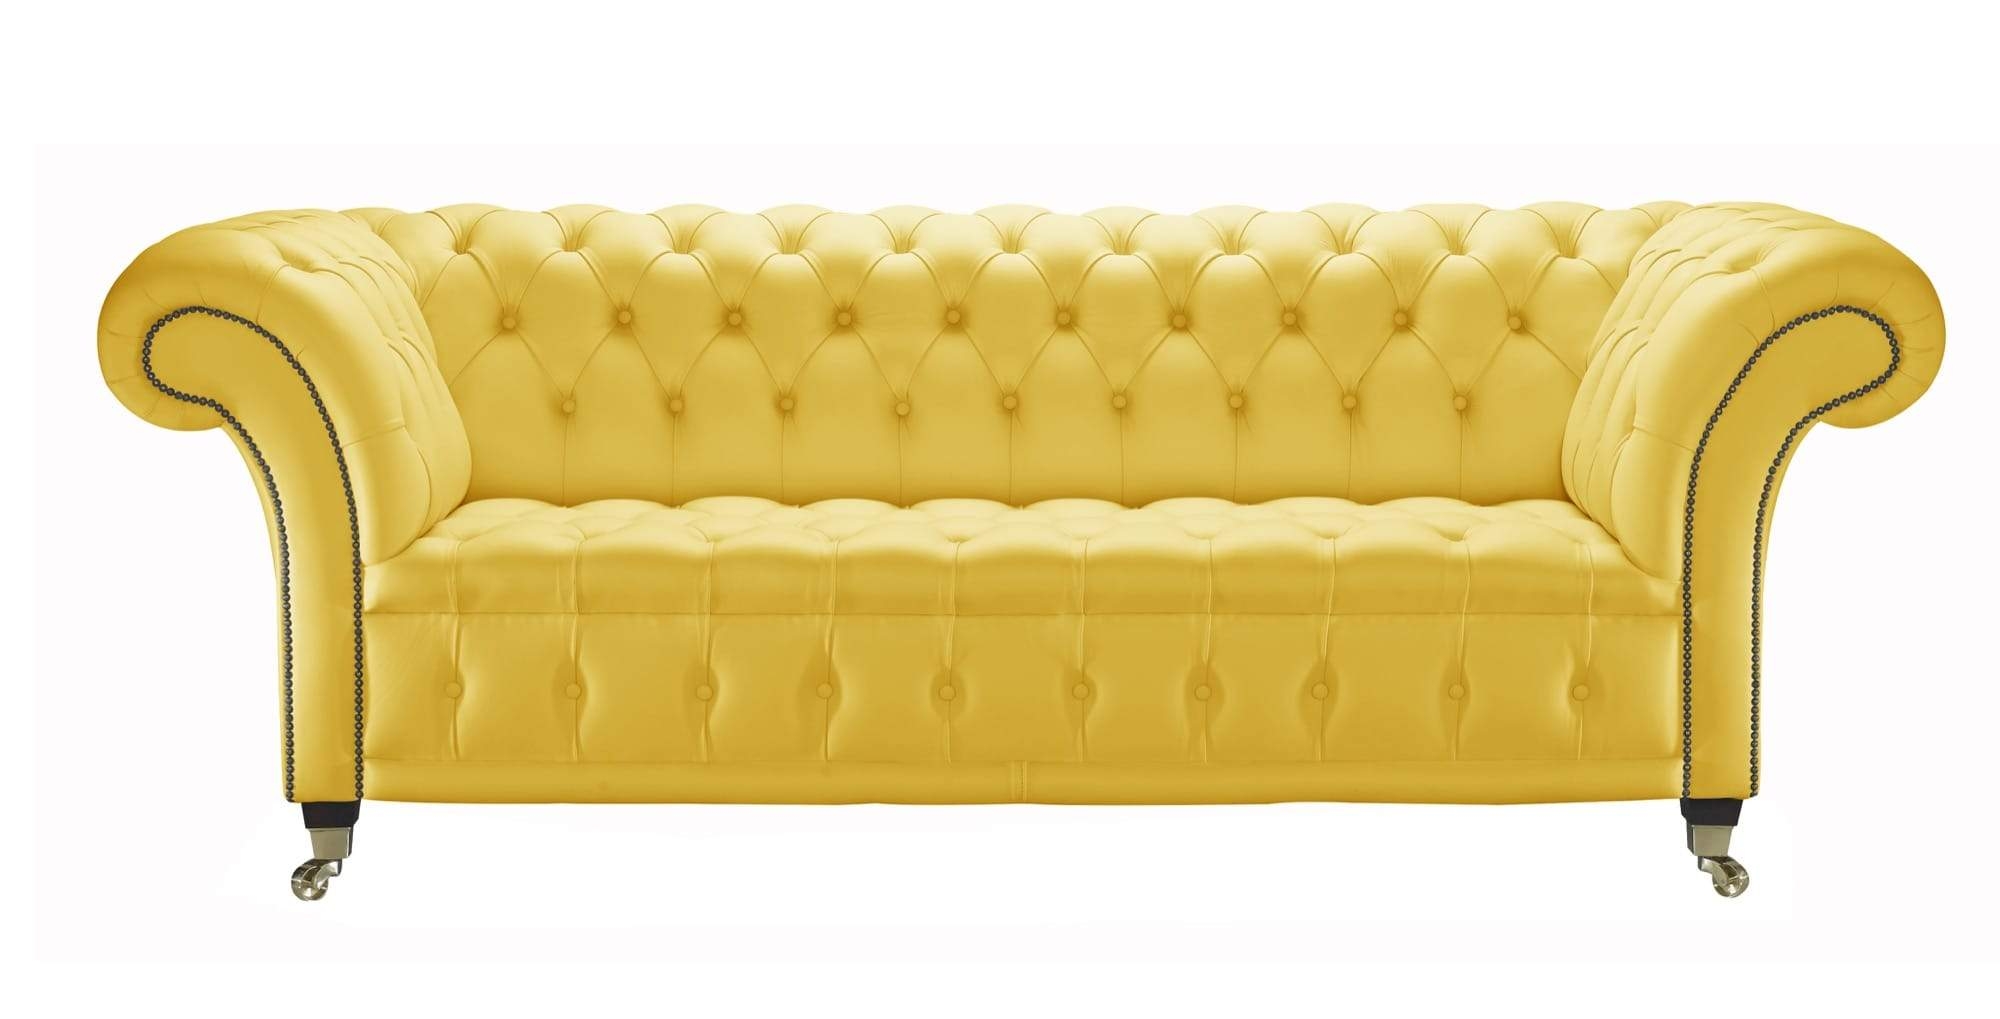 Portabello – Venetia Chesterfield Sofa – Yellow House Leather 2 Seater – High Quality Leather – Yellow – Chesterfield – 2 Seater 183 X 83 X 88 cm